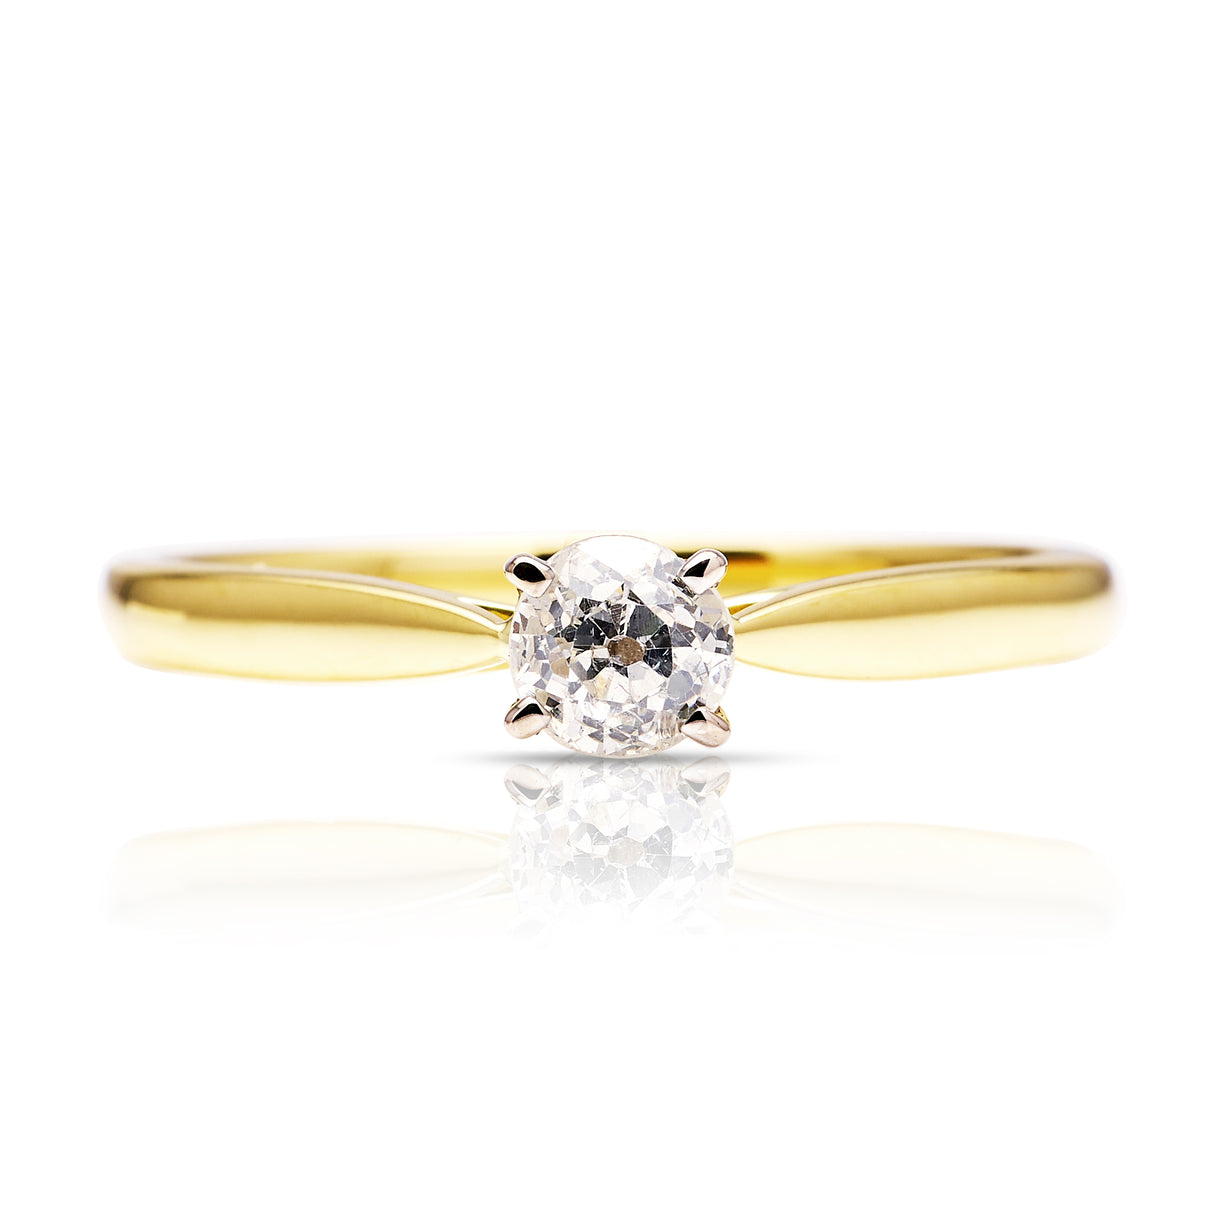 Contemporary, Solitaire old cut Diamond Engagement Ring, 18ct Yellow Gold